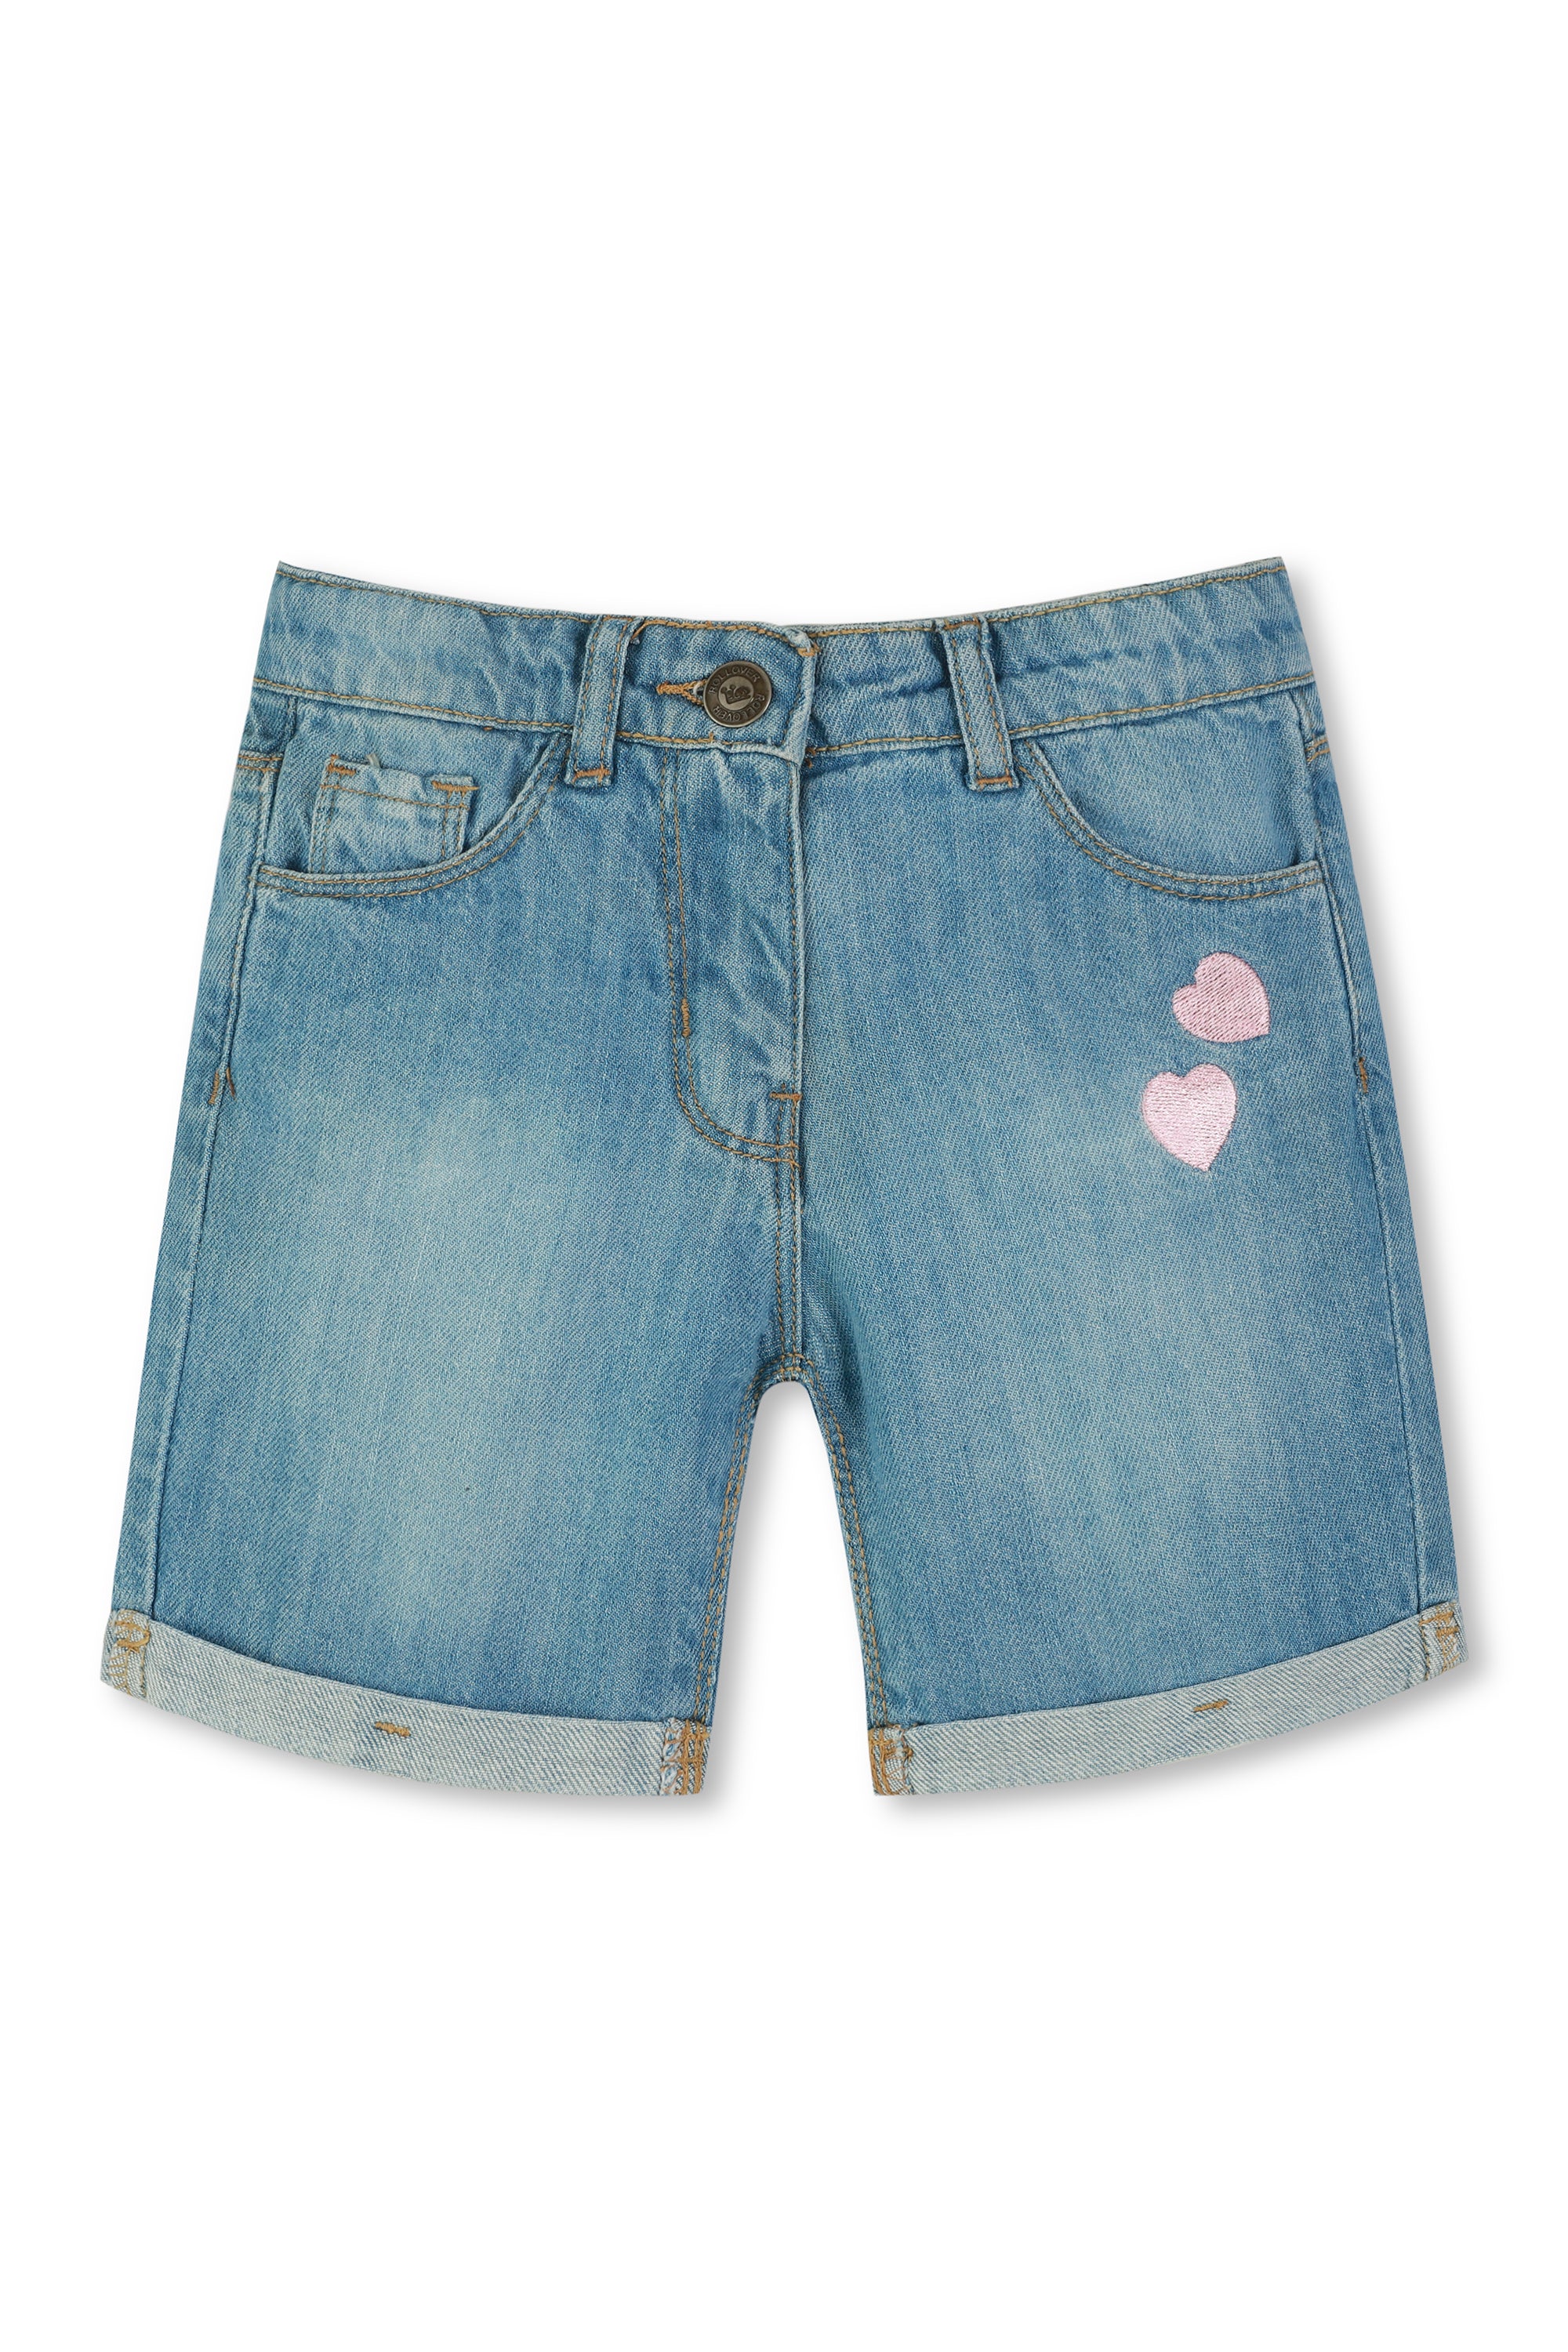 Sequin Hearts Embroidered Girl Jean Shorts